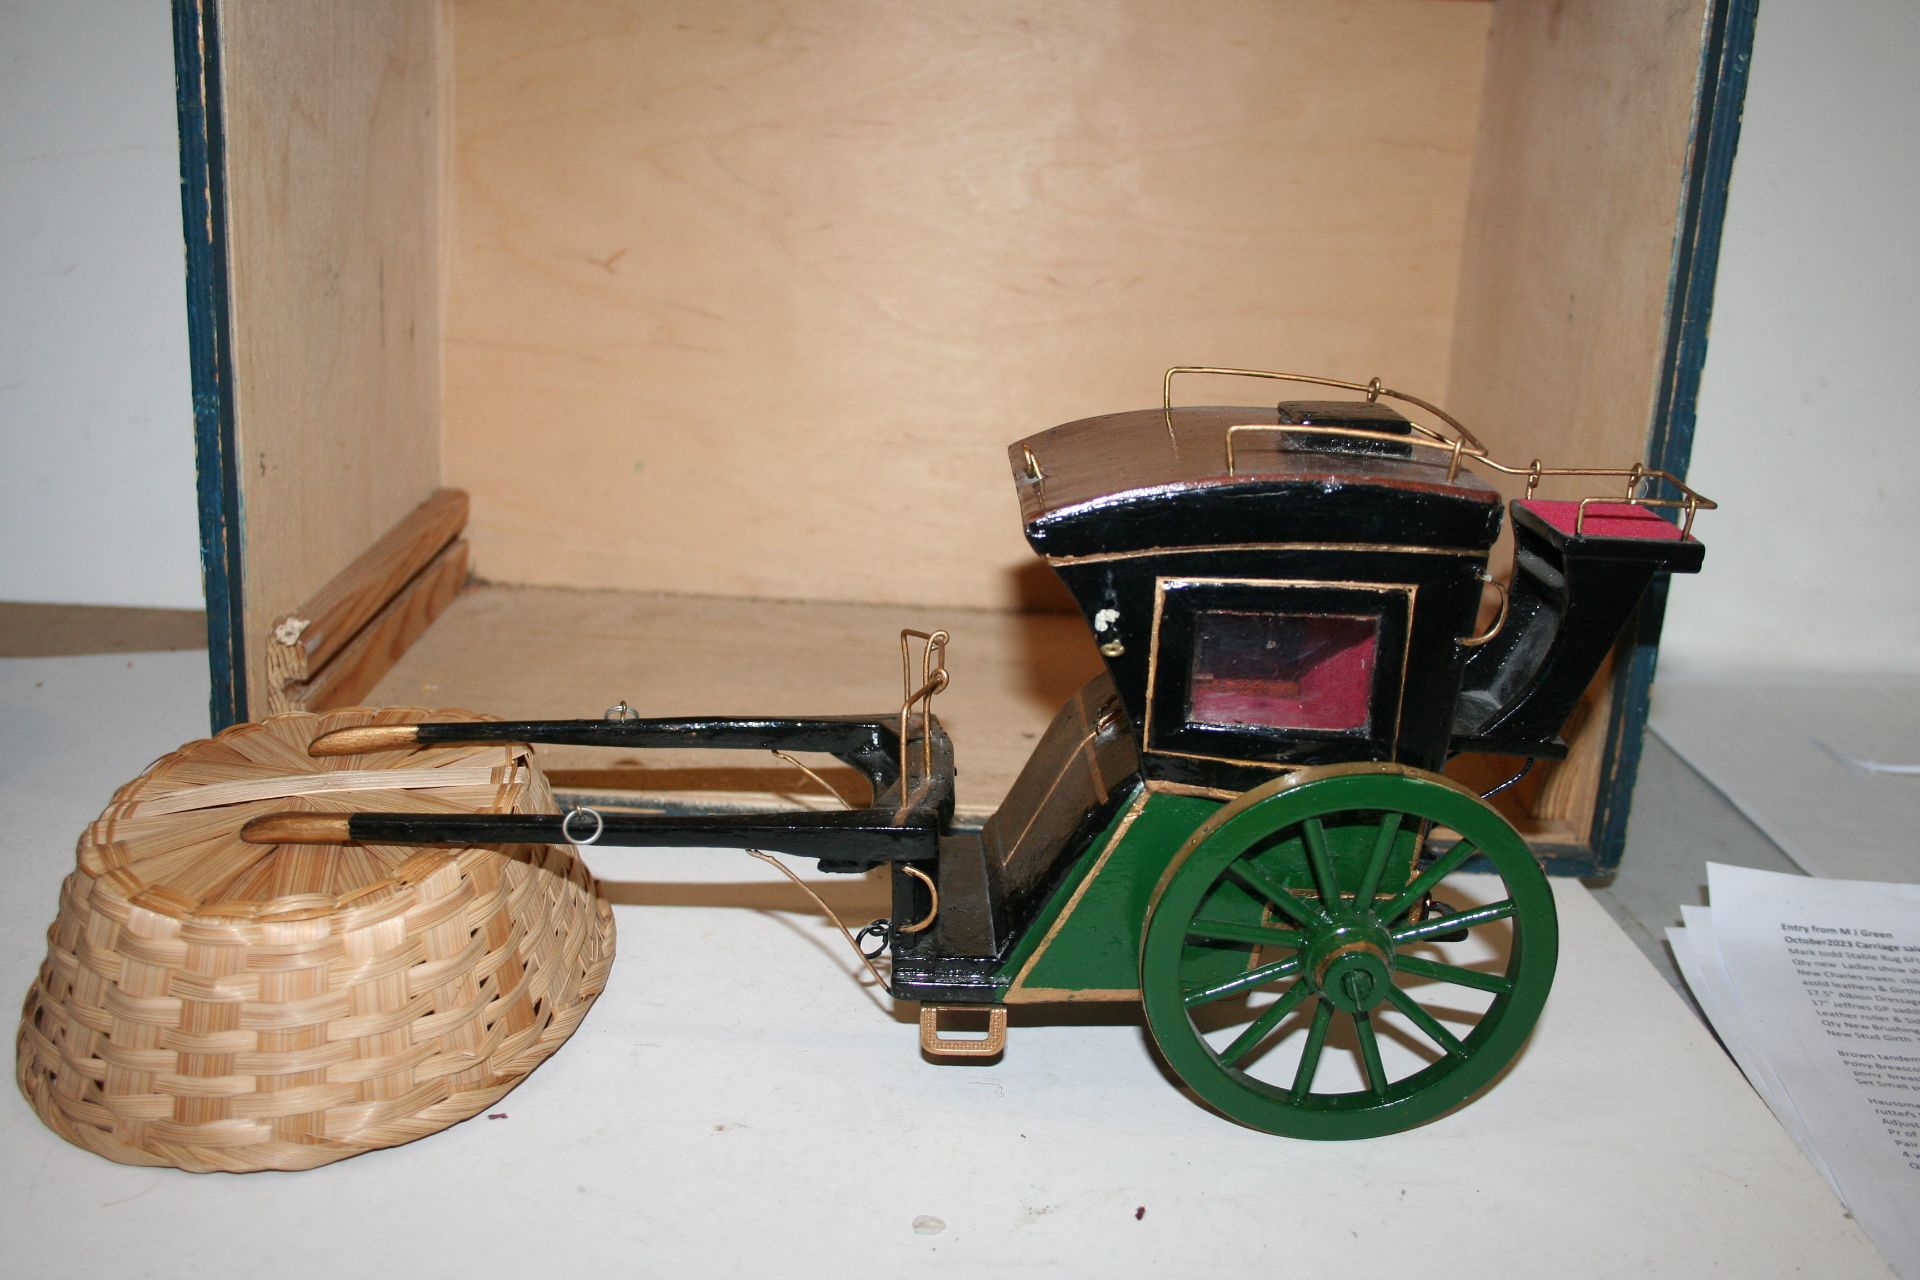 Model of a Hansom Cab, complete with carrying case. 14" long including shafts by 7 1/2" high.